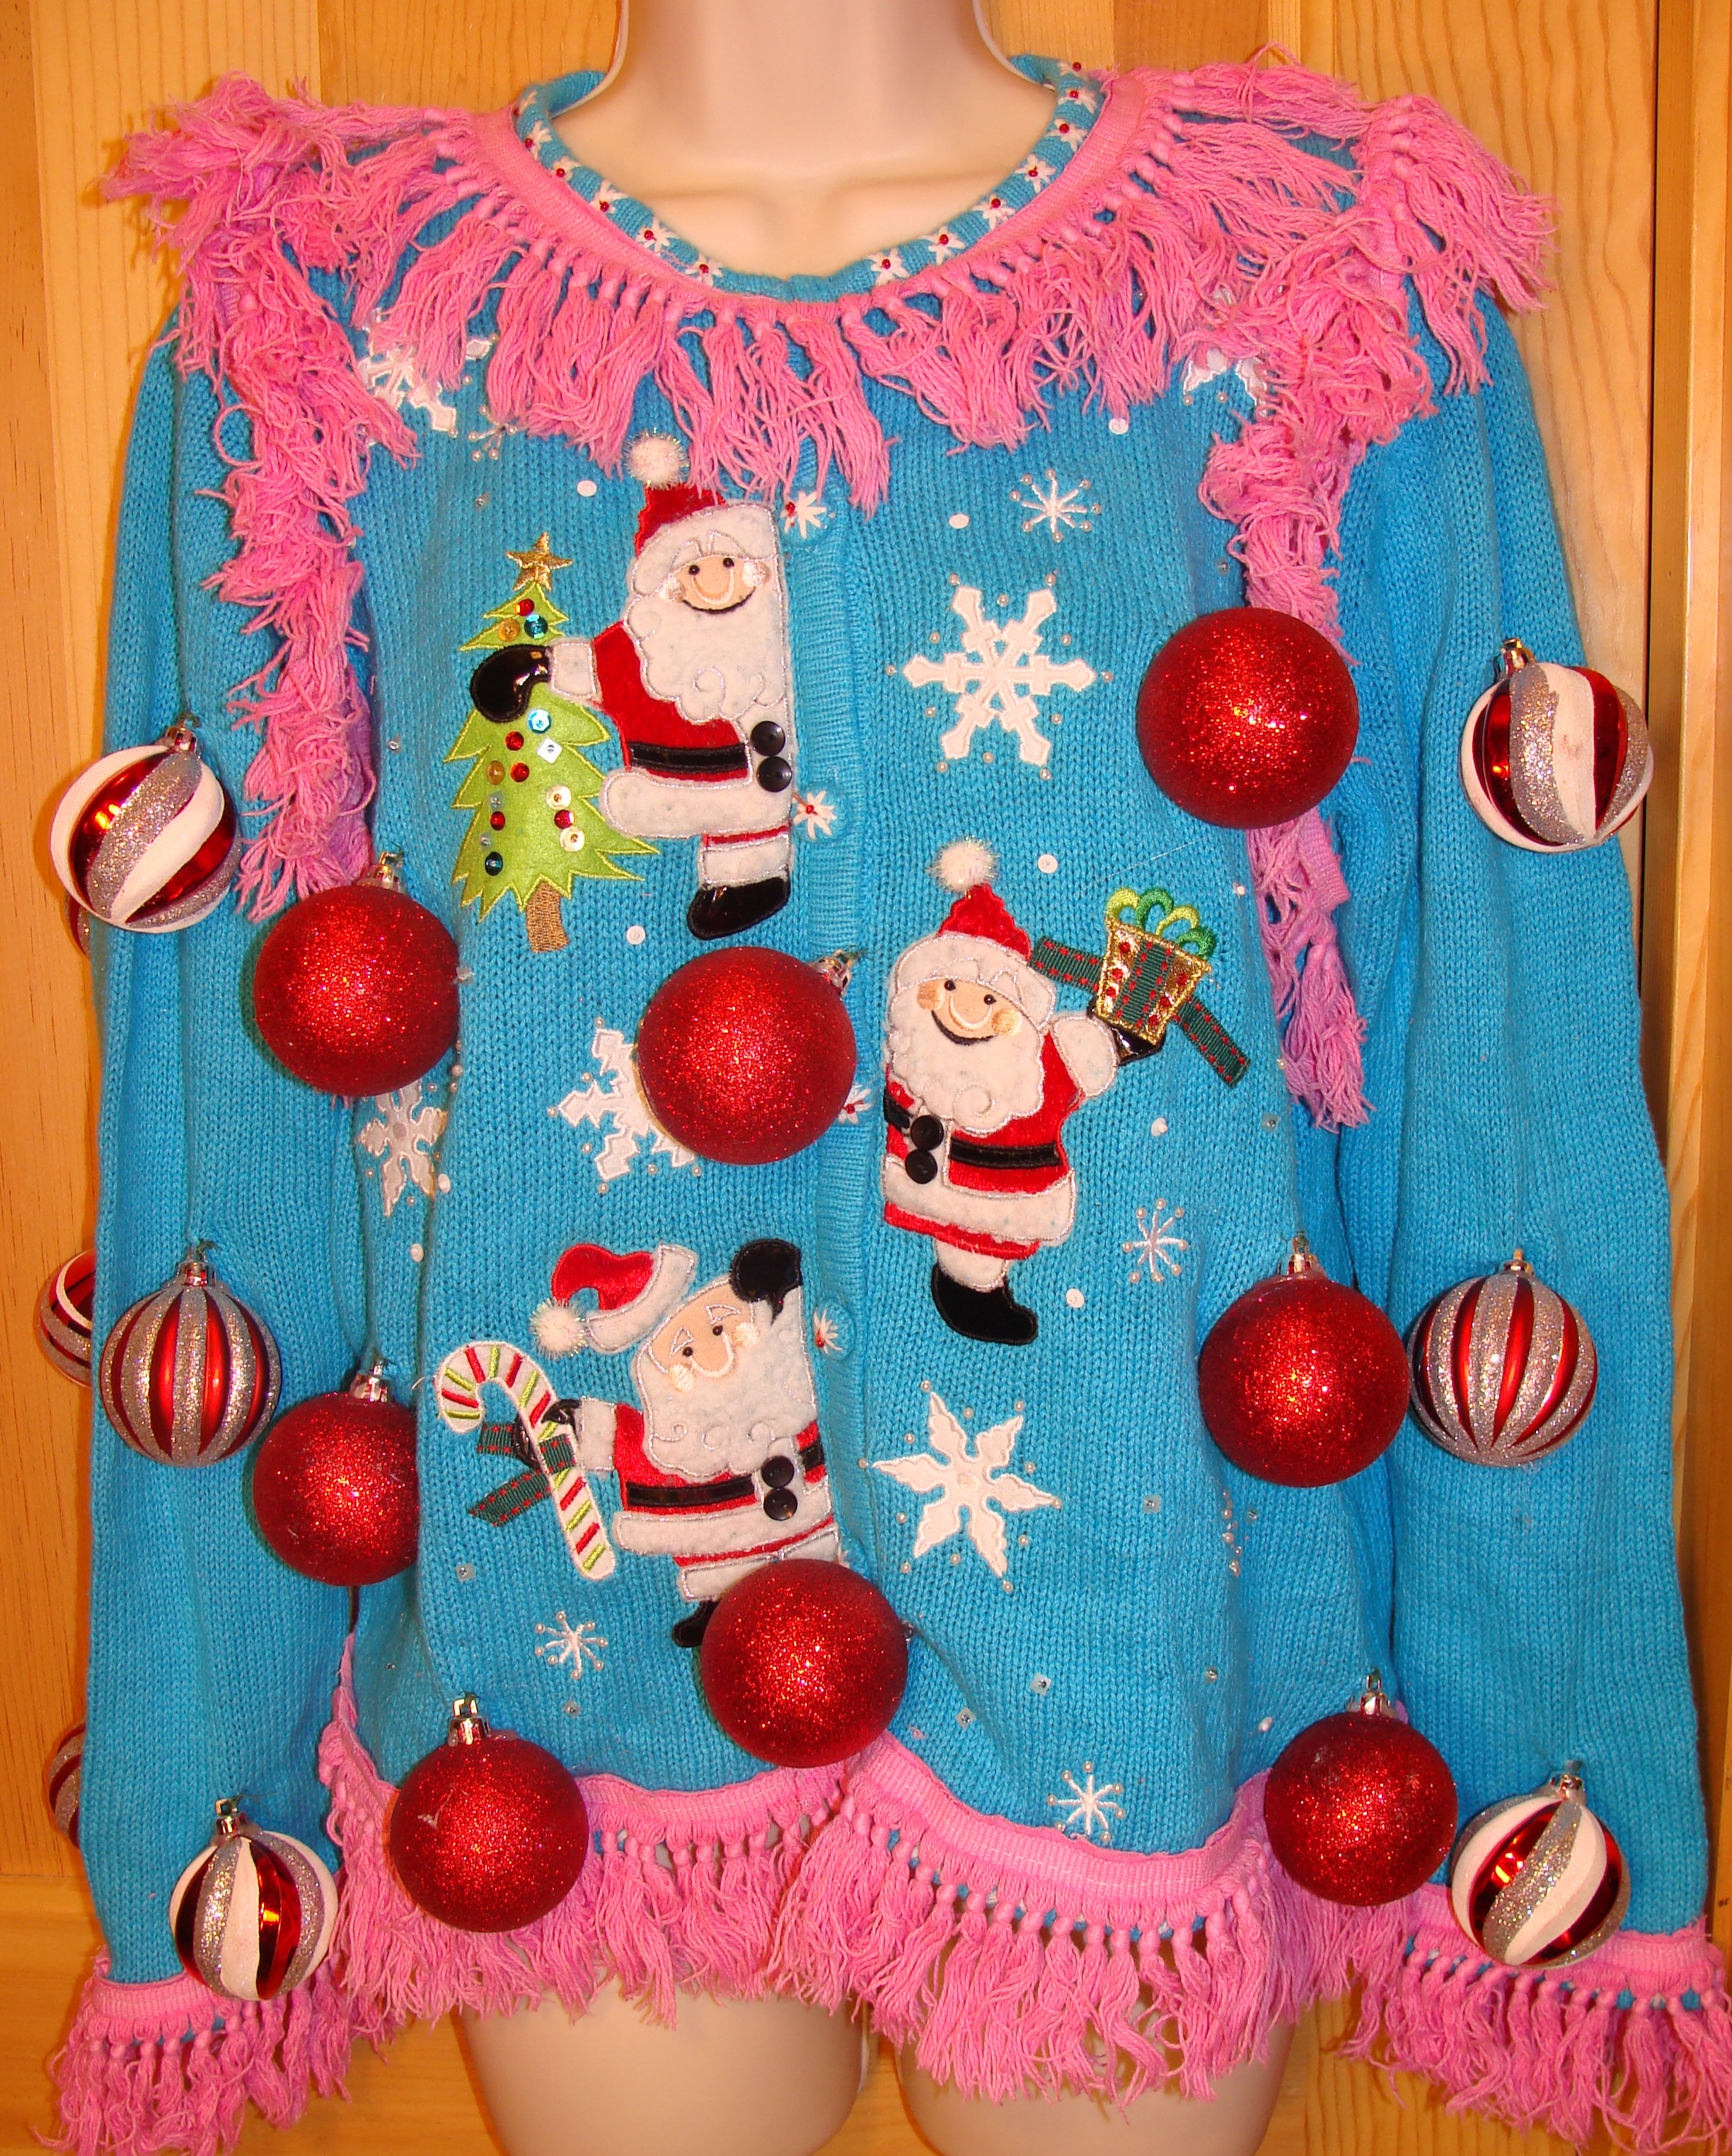 Bad/ugly Christmas sweater ideas